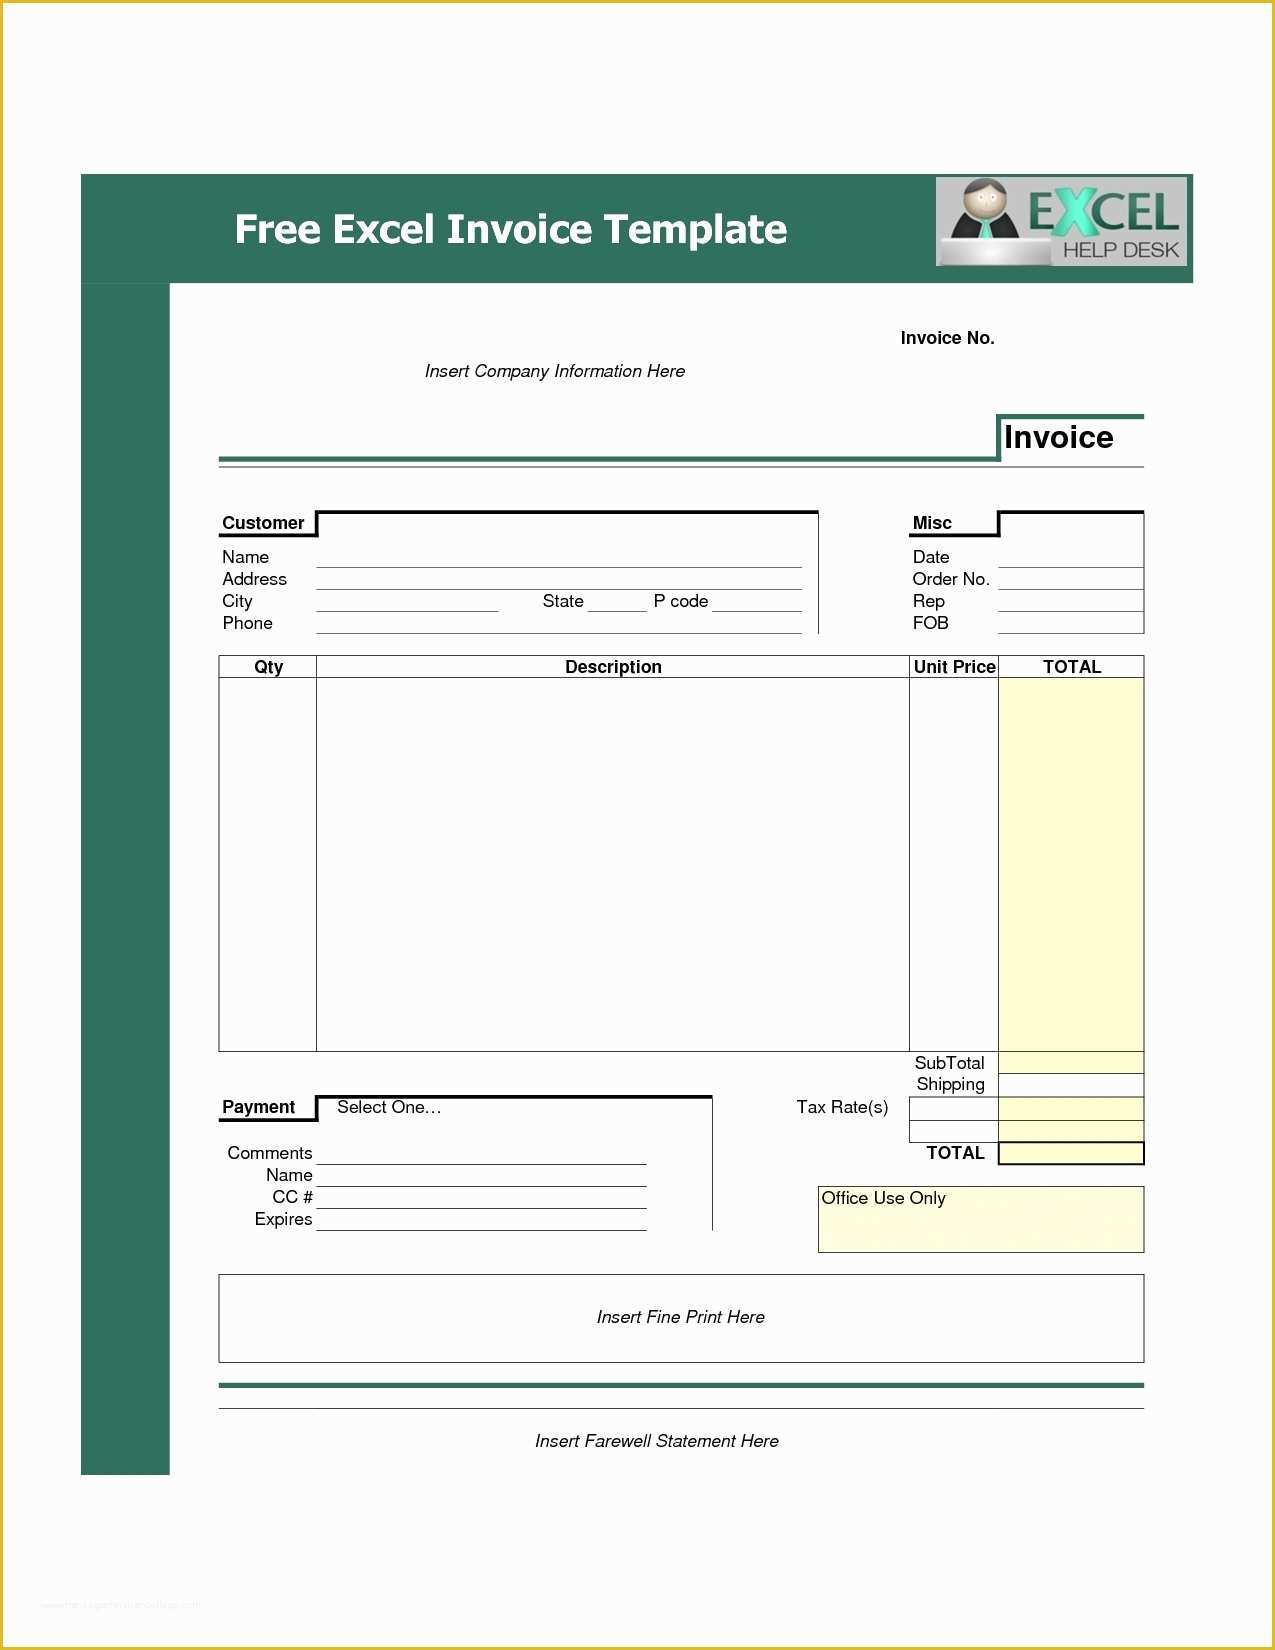 Invoice Template Excel Download Free Of Invoice Template Free Download Excel Invoice Template Ideas